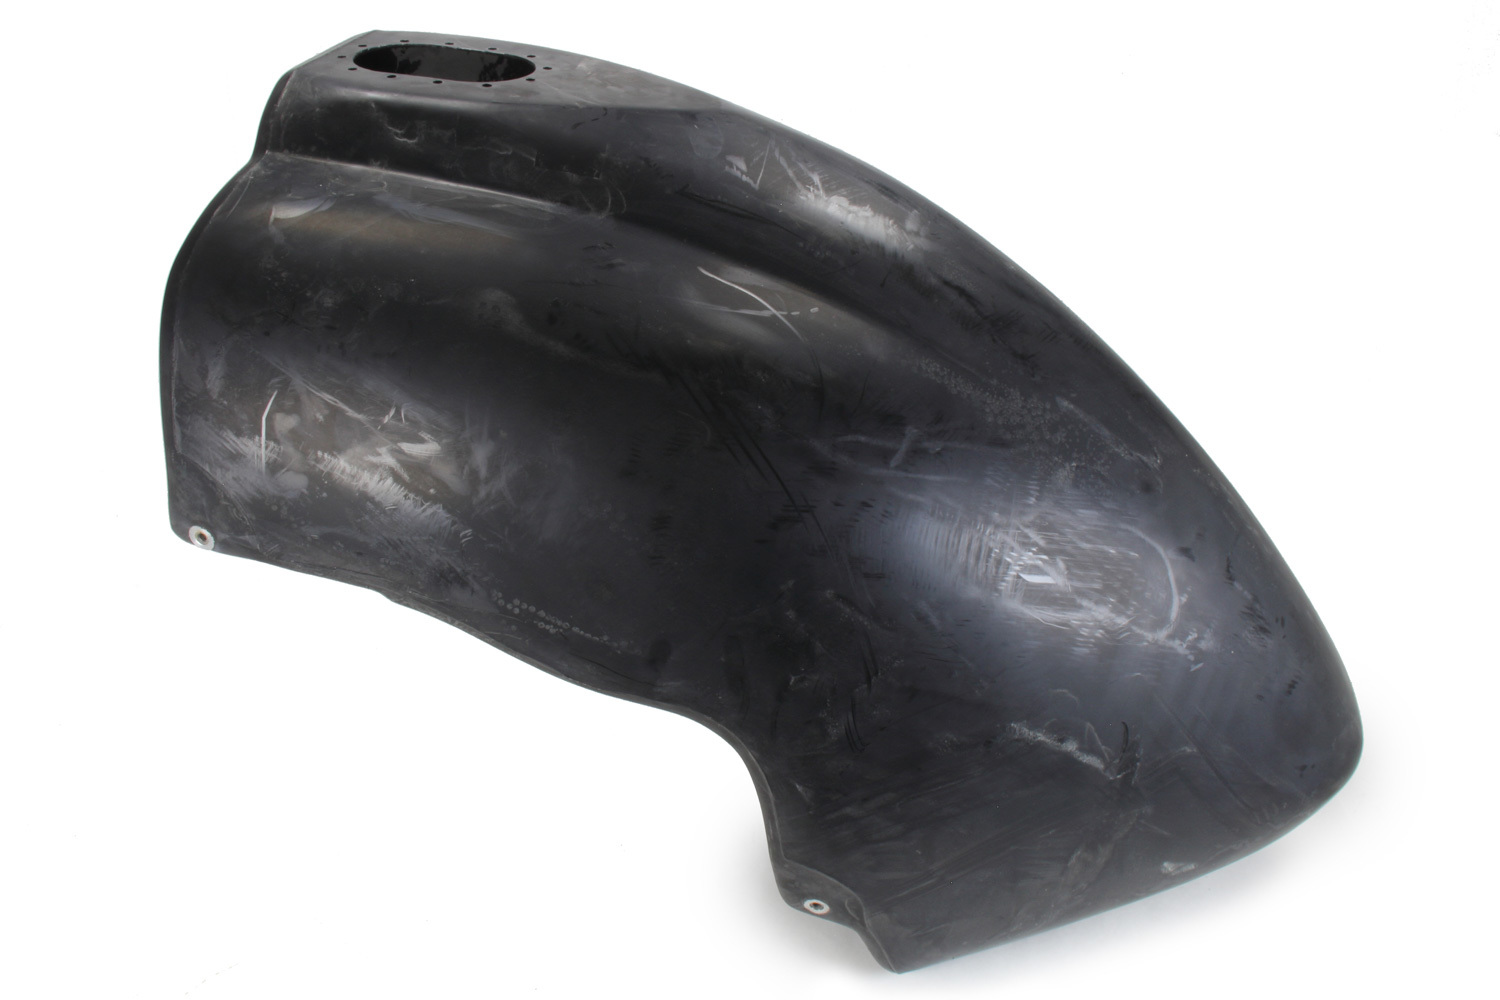 Saldana Racing Products FTOS28 Tail Tank Shell, 28 gal, Top Outlet, Outlaw, Sprint, Each